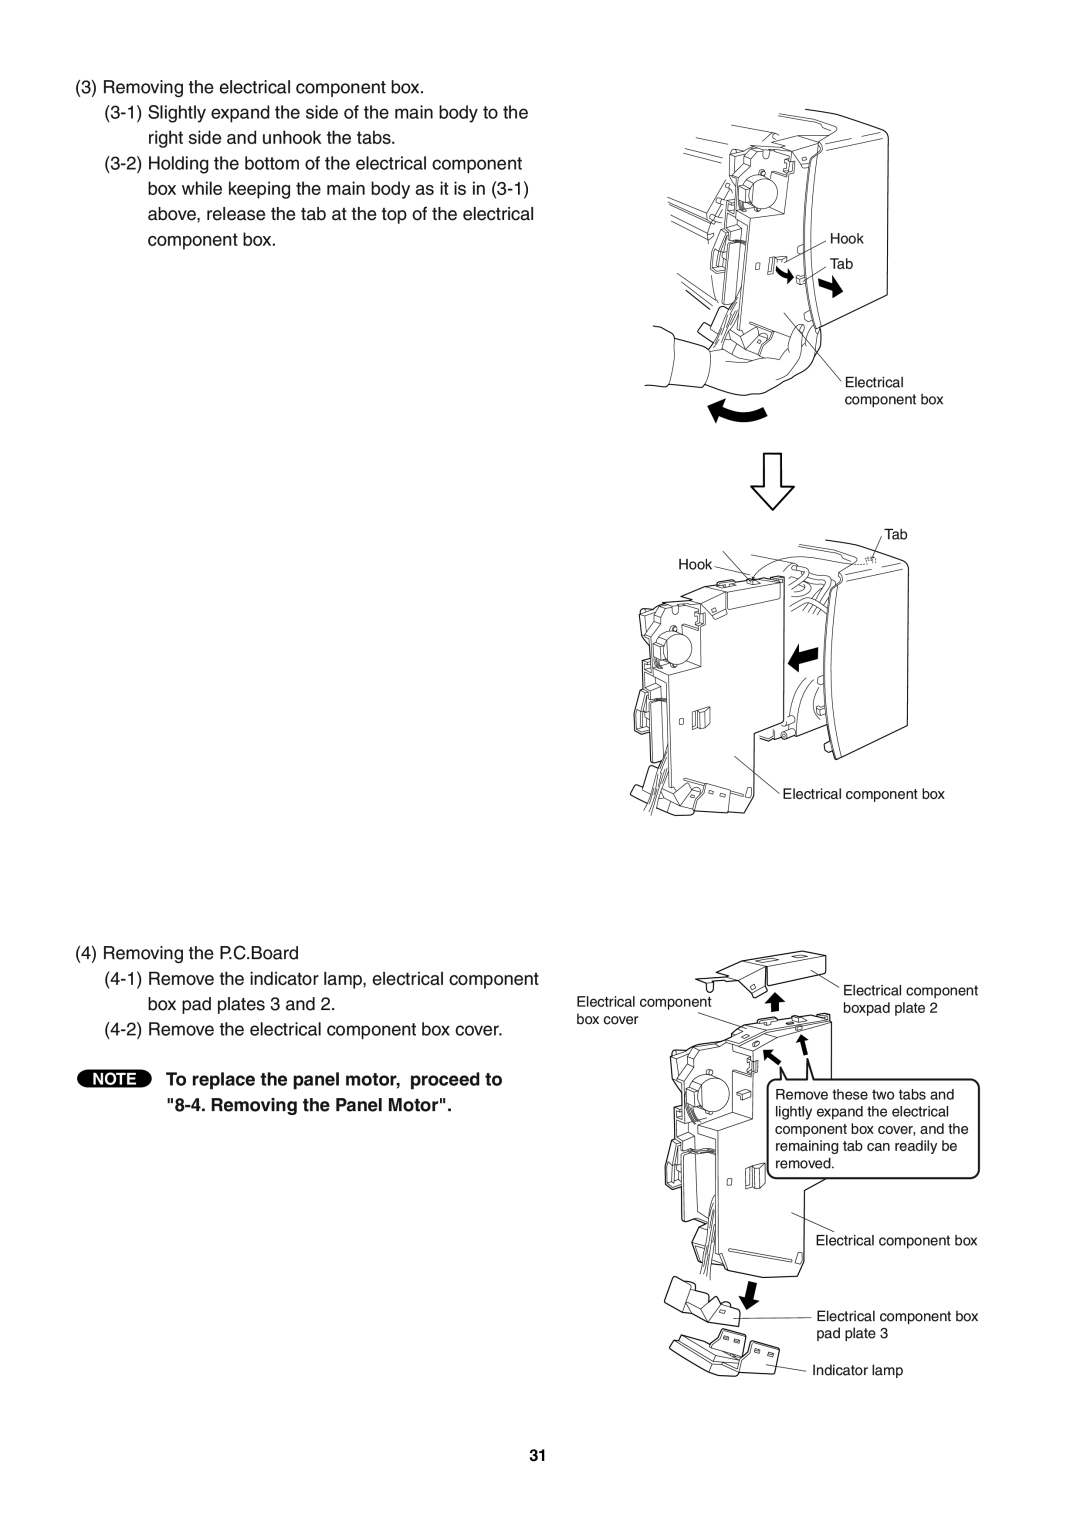 Sanyo SAP-KRV94EHDX service manual 3Removing the electrical component box 